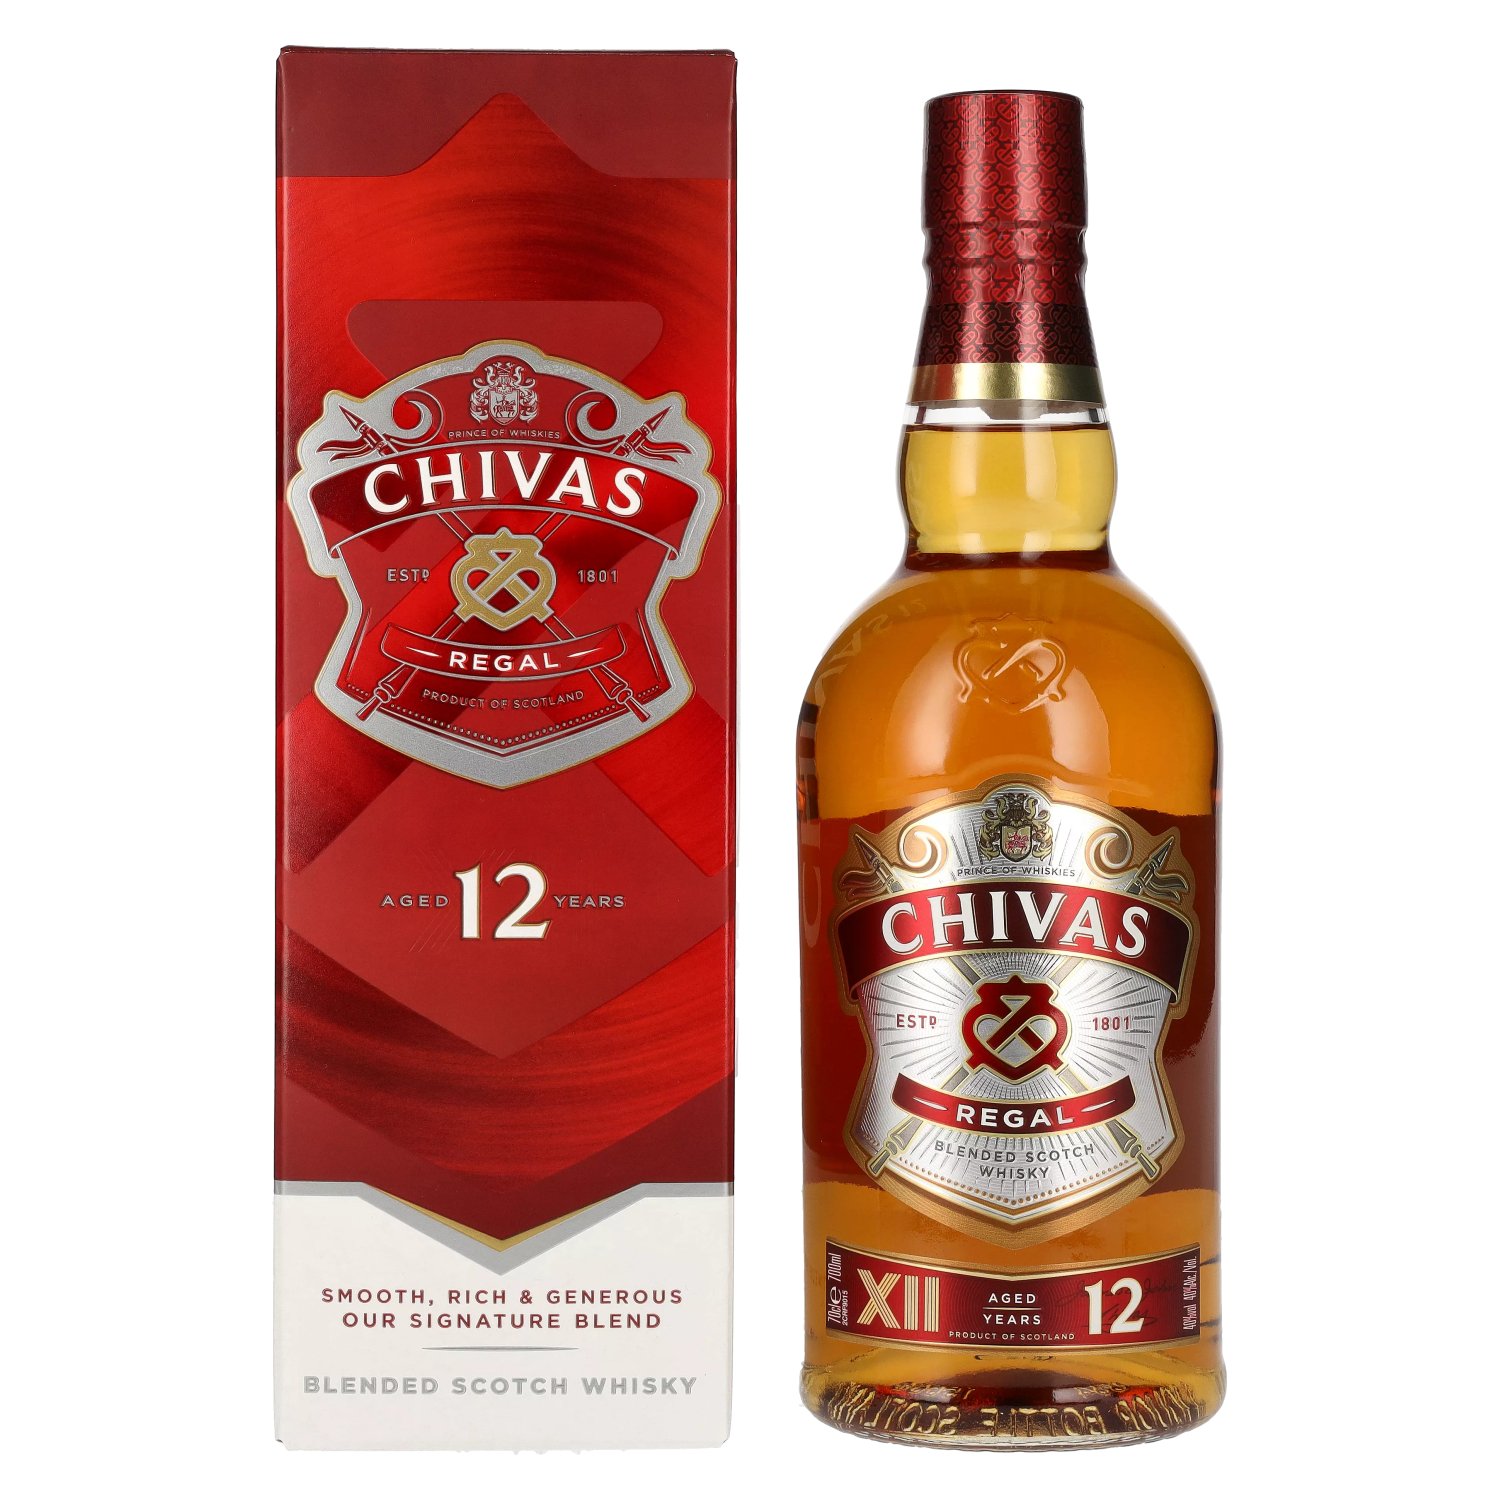 Chivas Regal Old Blended Scotch Whisky 40% 0,7l in Giftbox